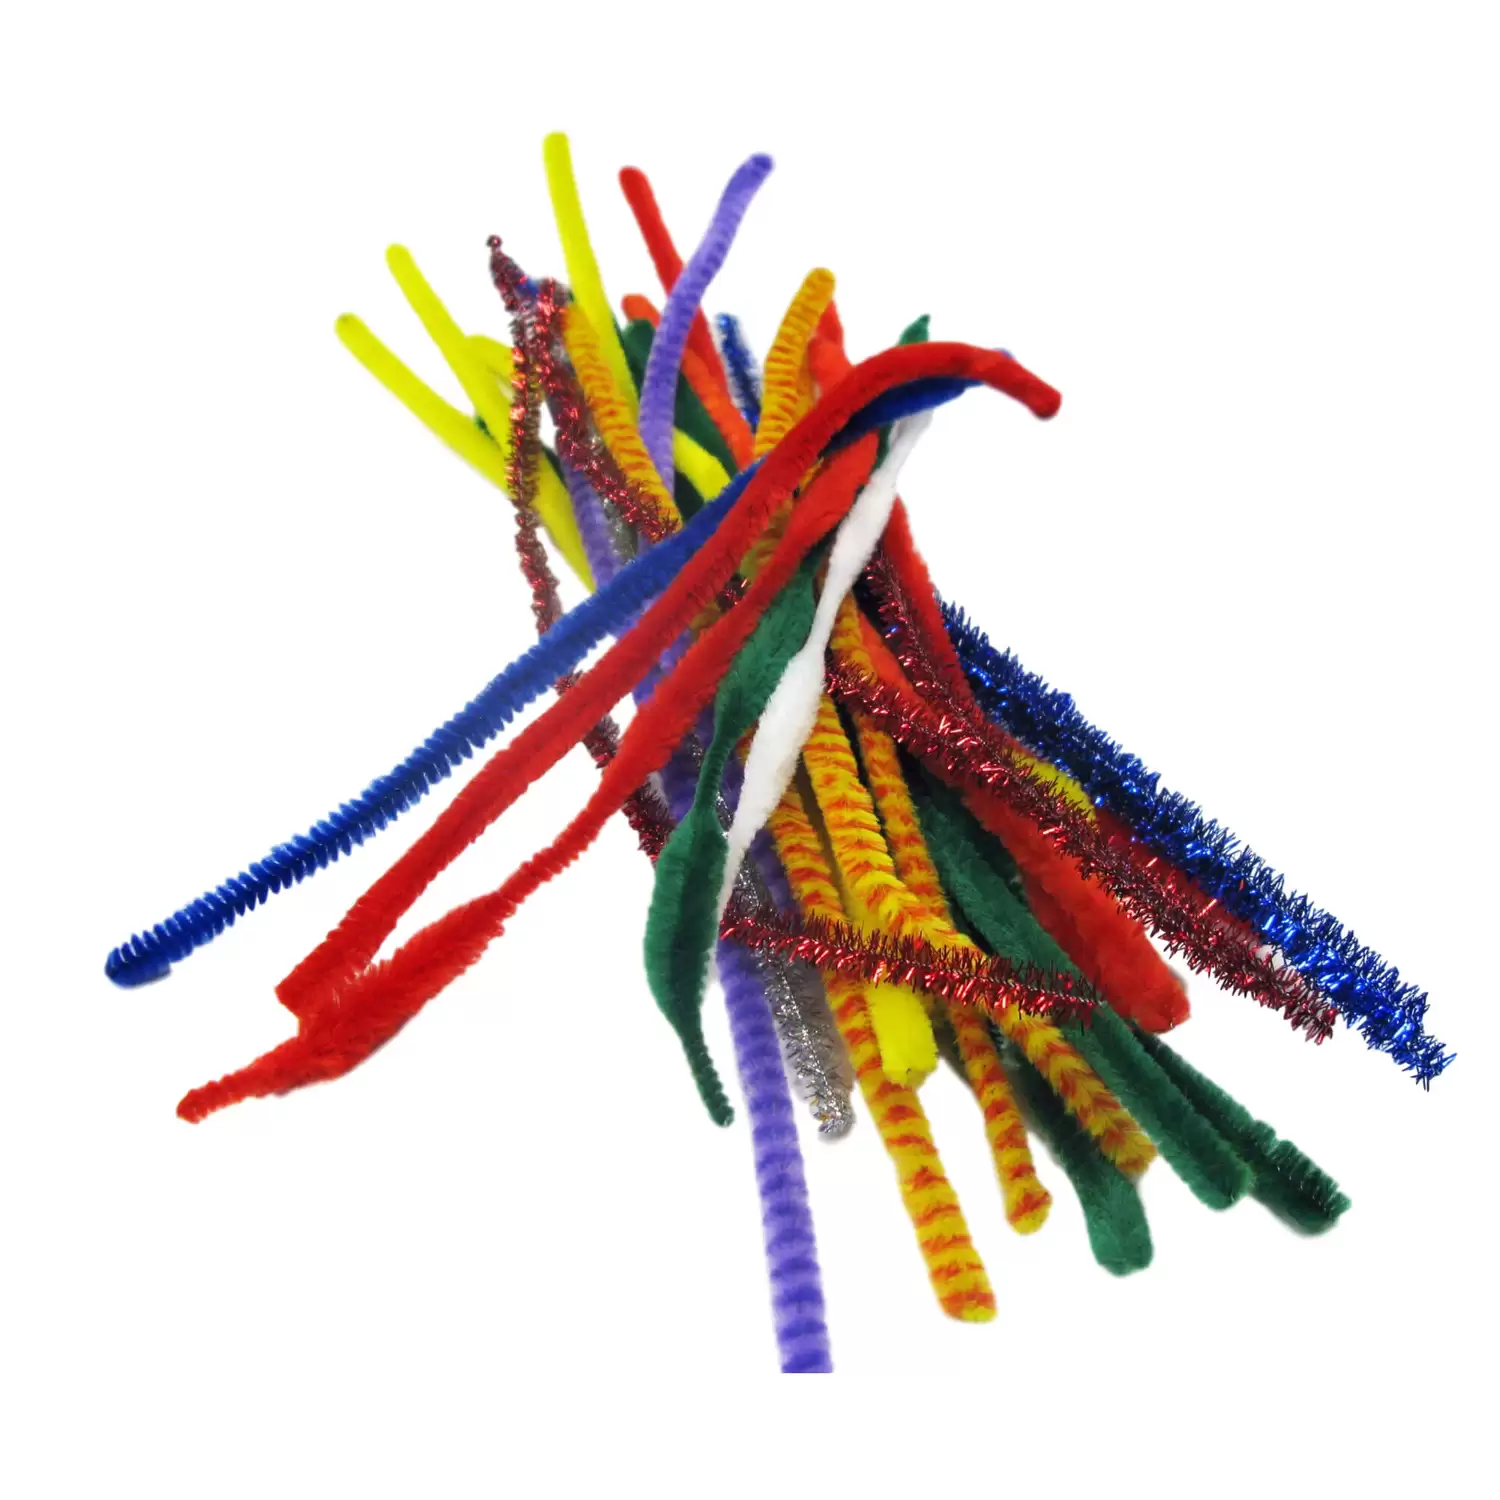 Elastic Bands Assortment - Gompels - Care & Nursery Supply Specialists